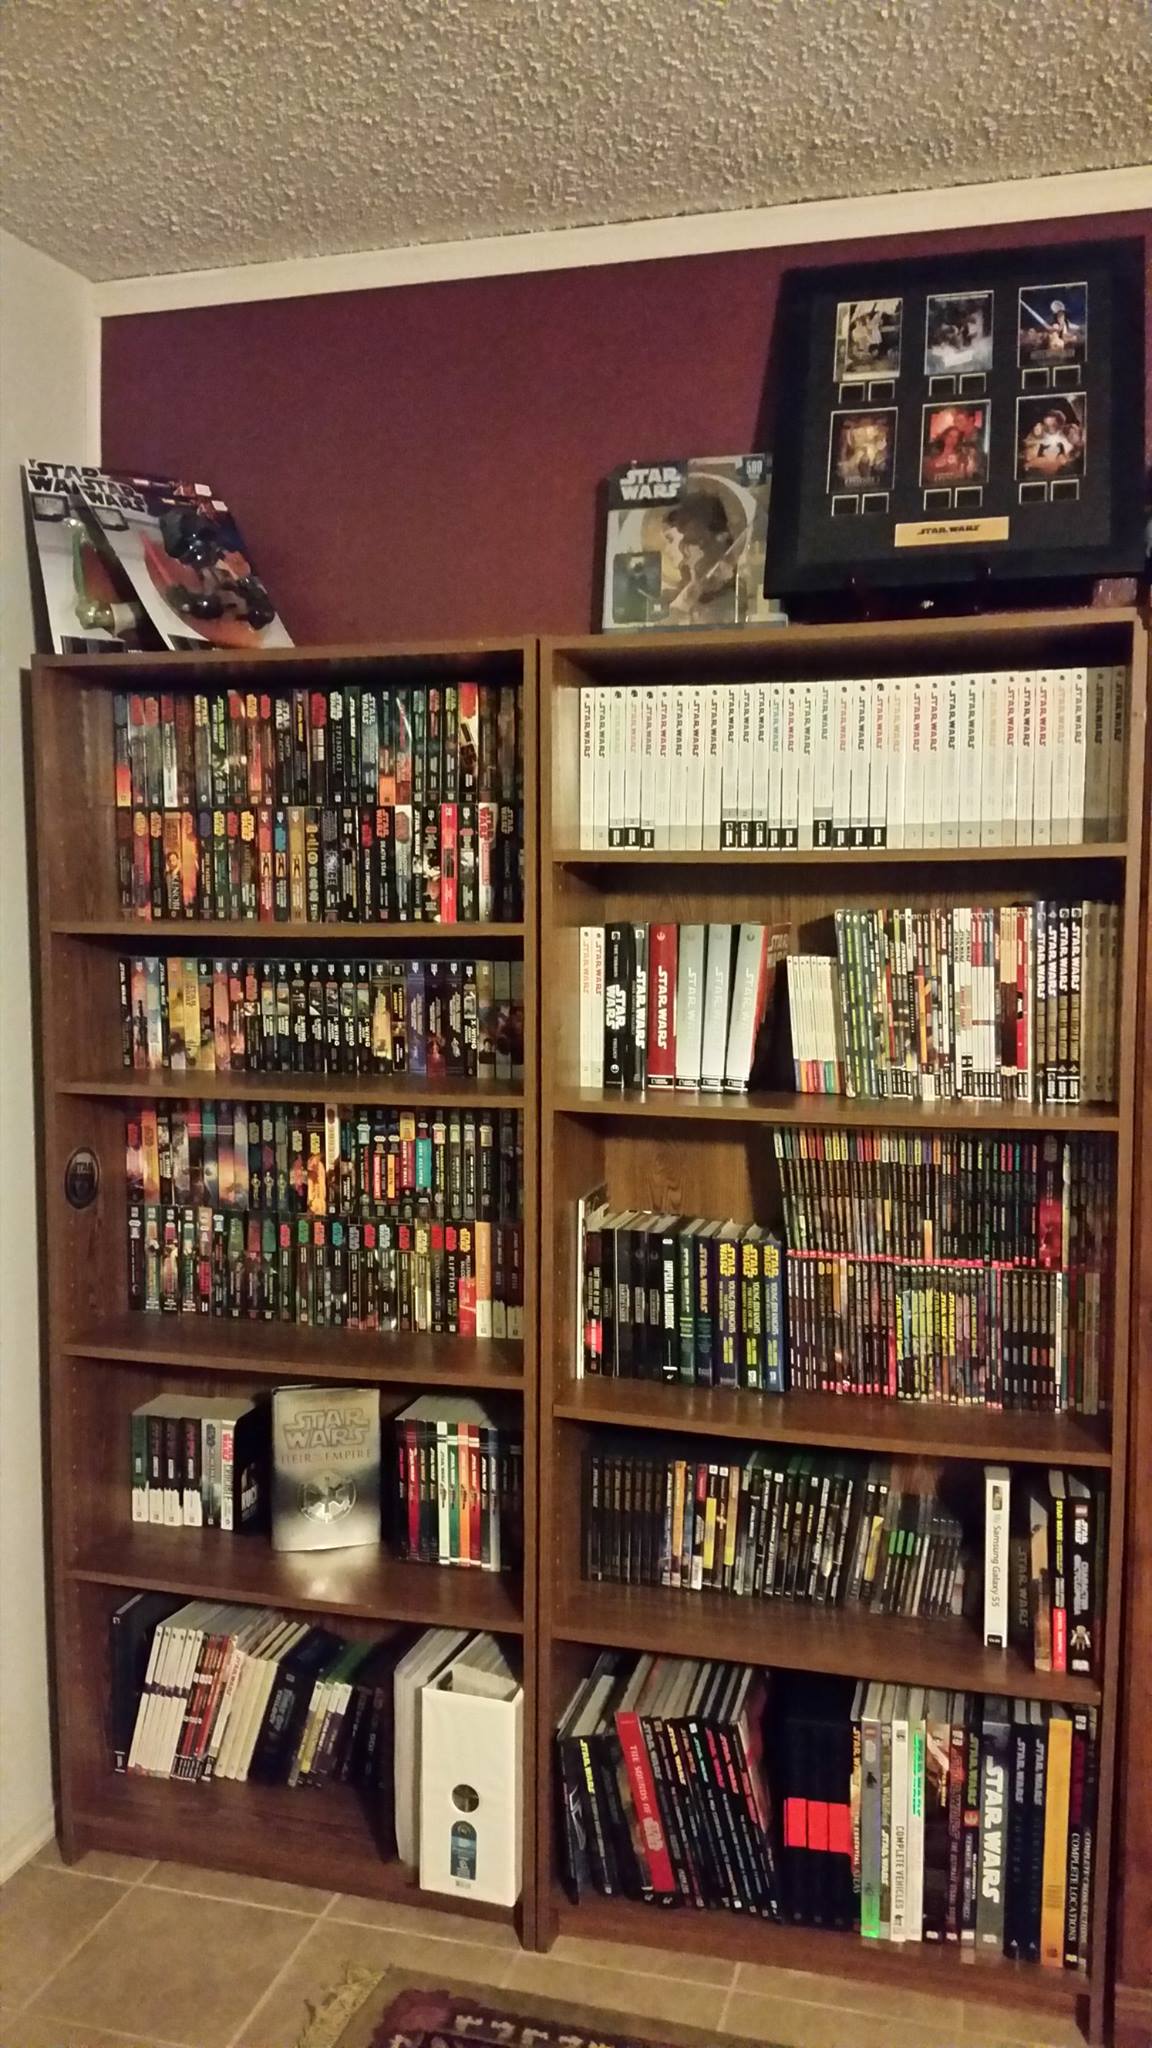 Chris's Star Wars library